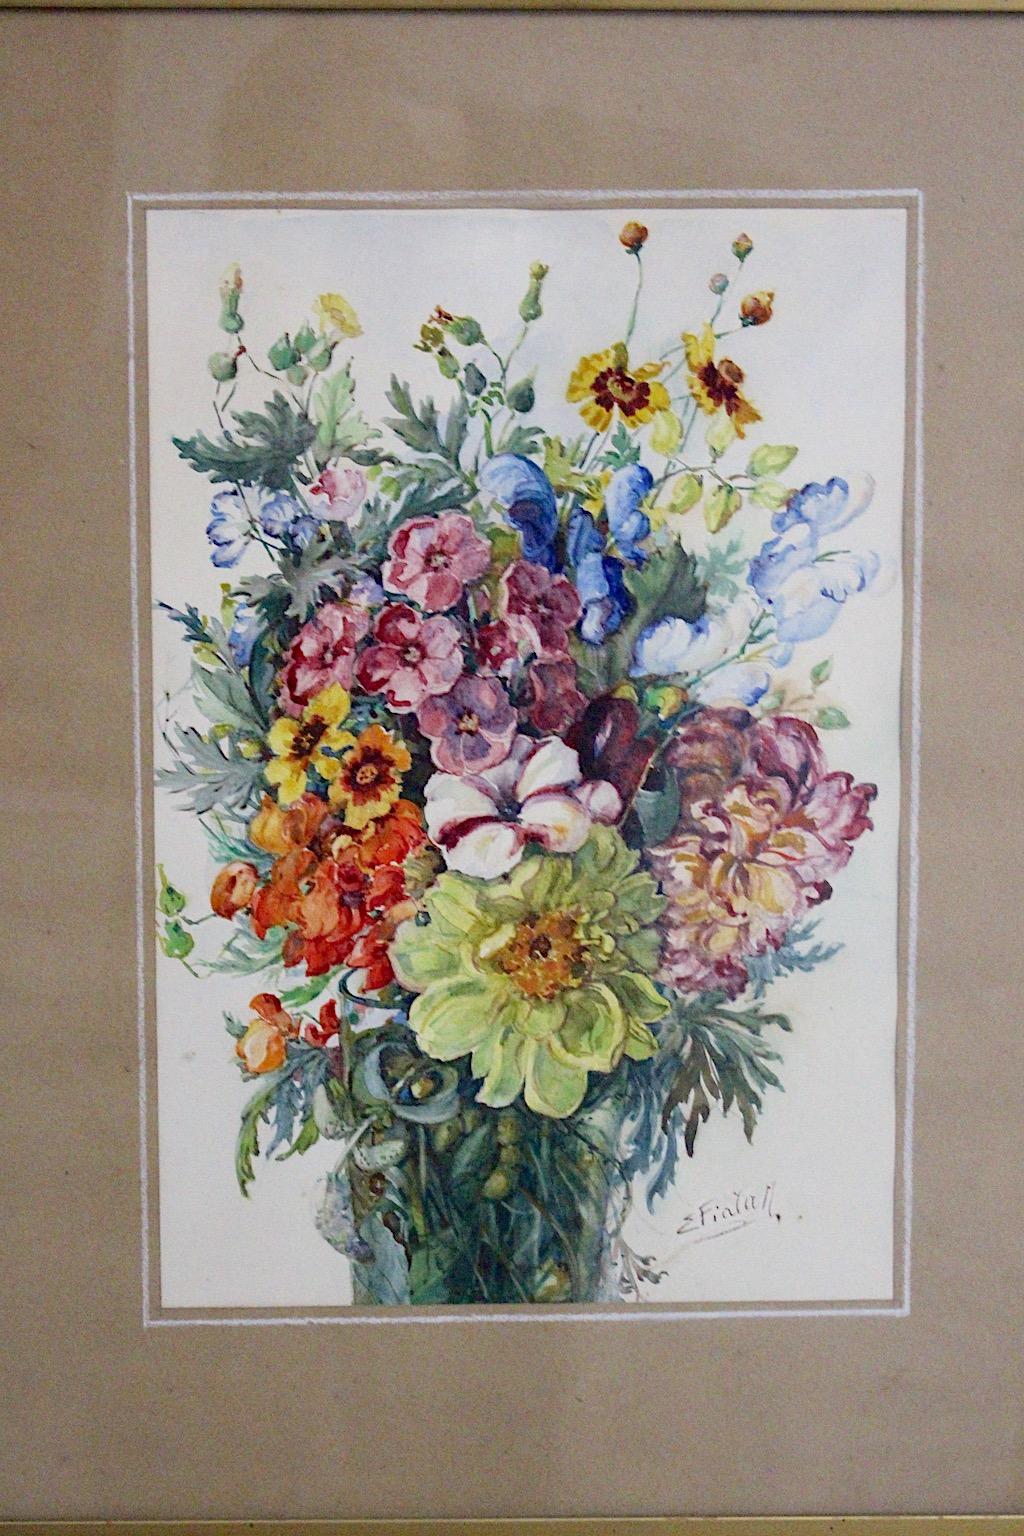 Paper Art Deco Watercolor Vintage Painting Wildflowers by Emil Fiala, Vienna, 1930s For Sale